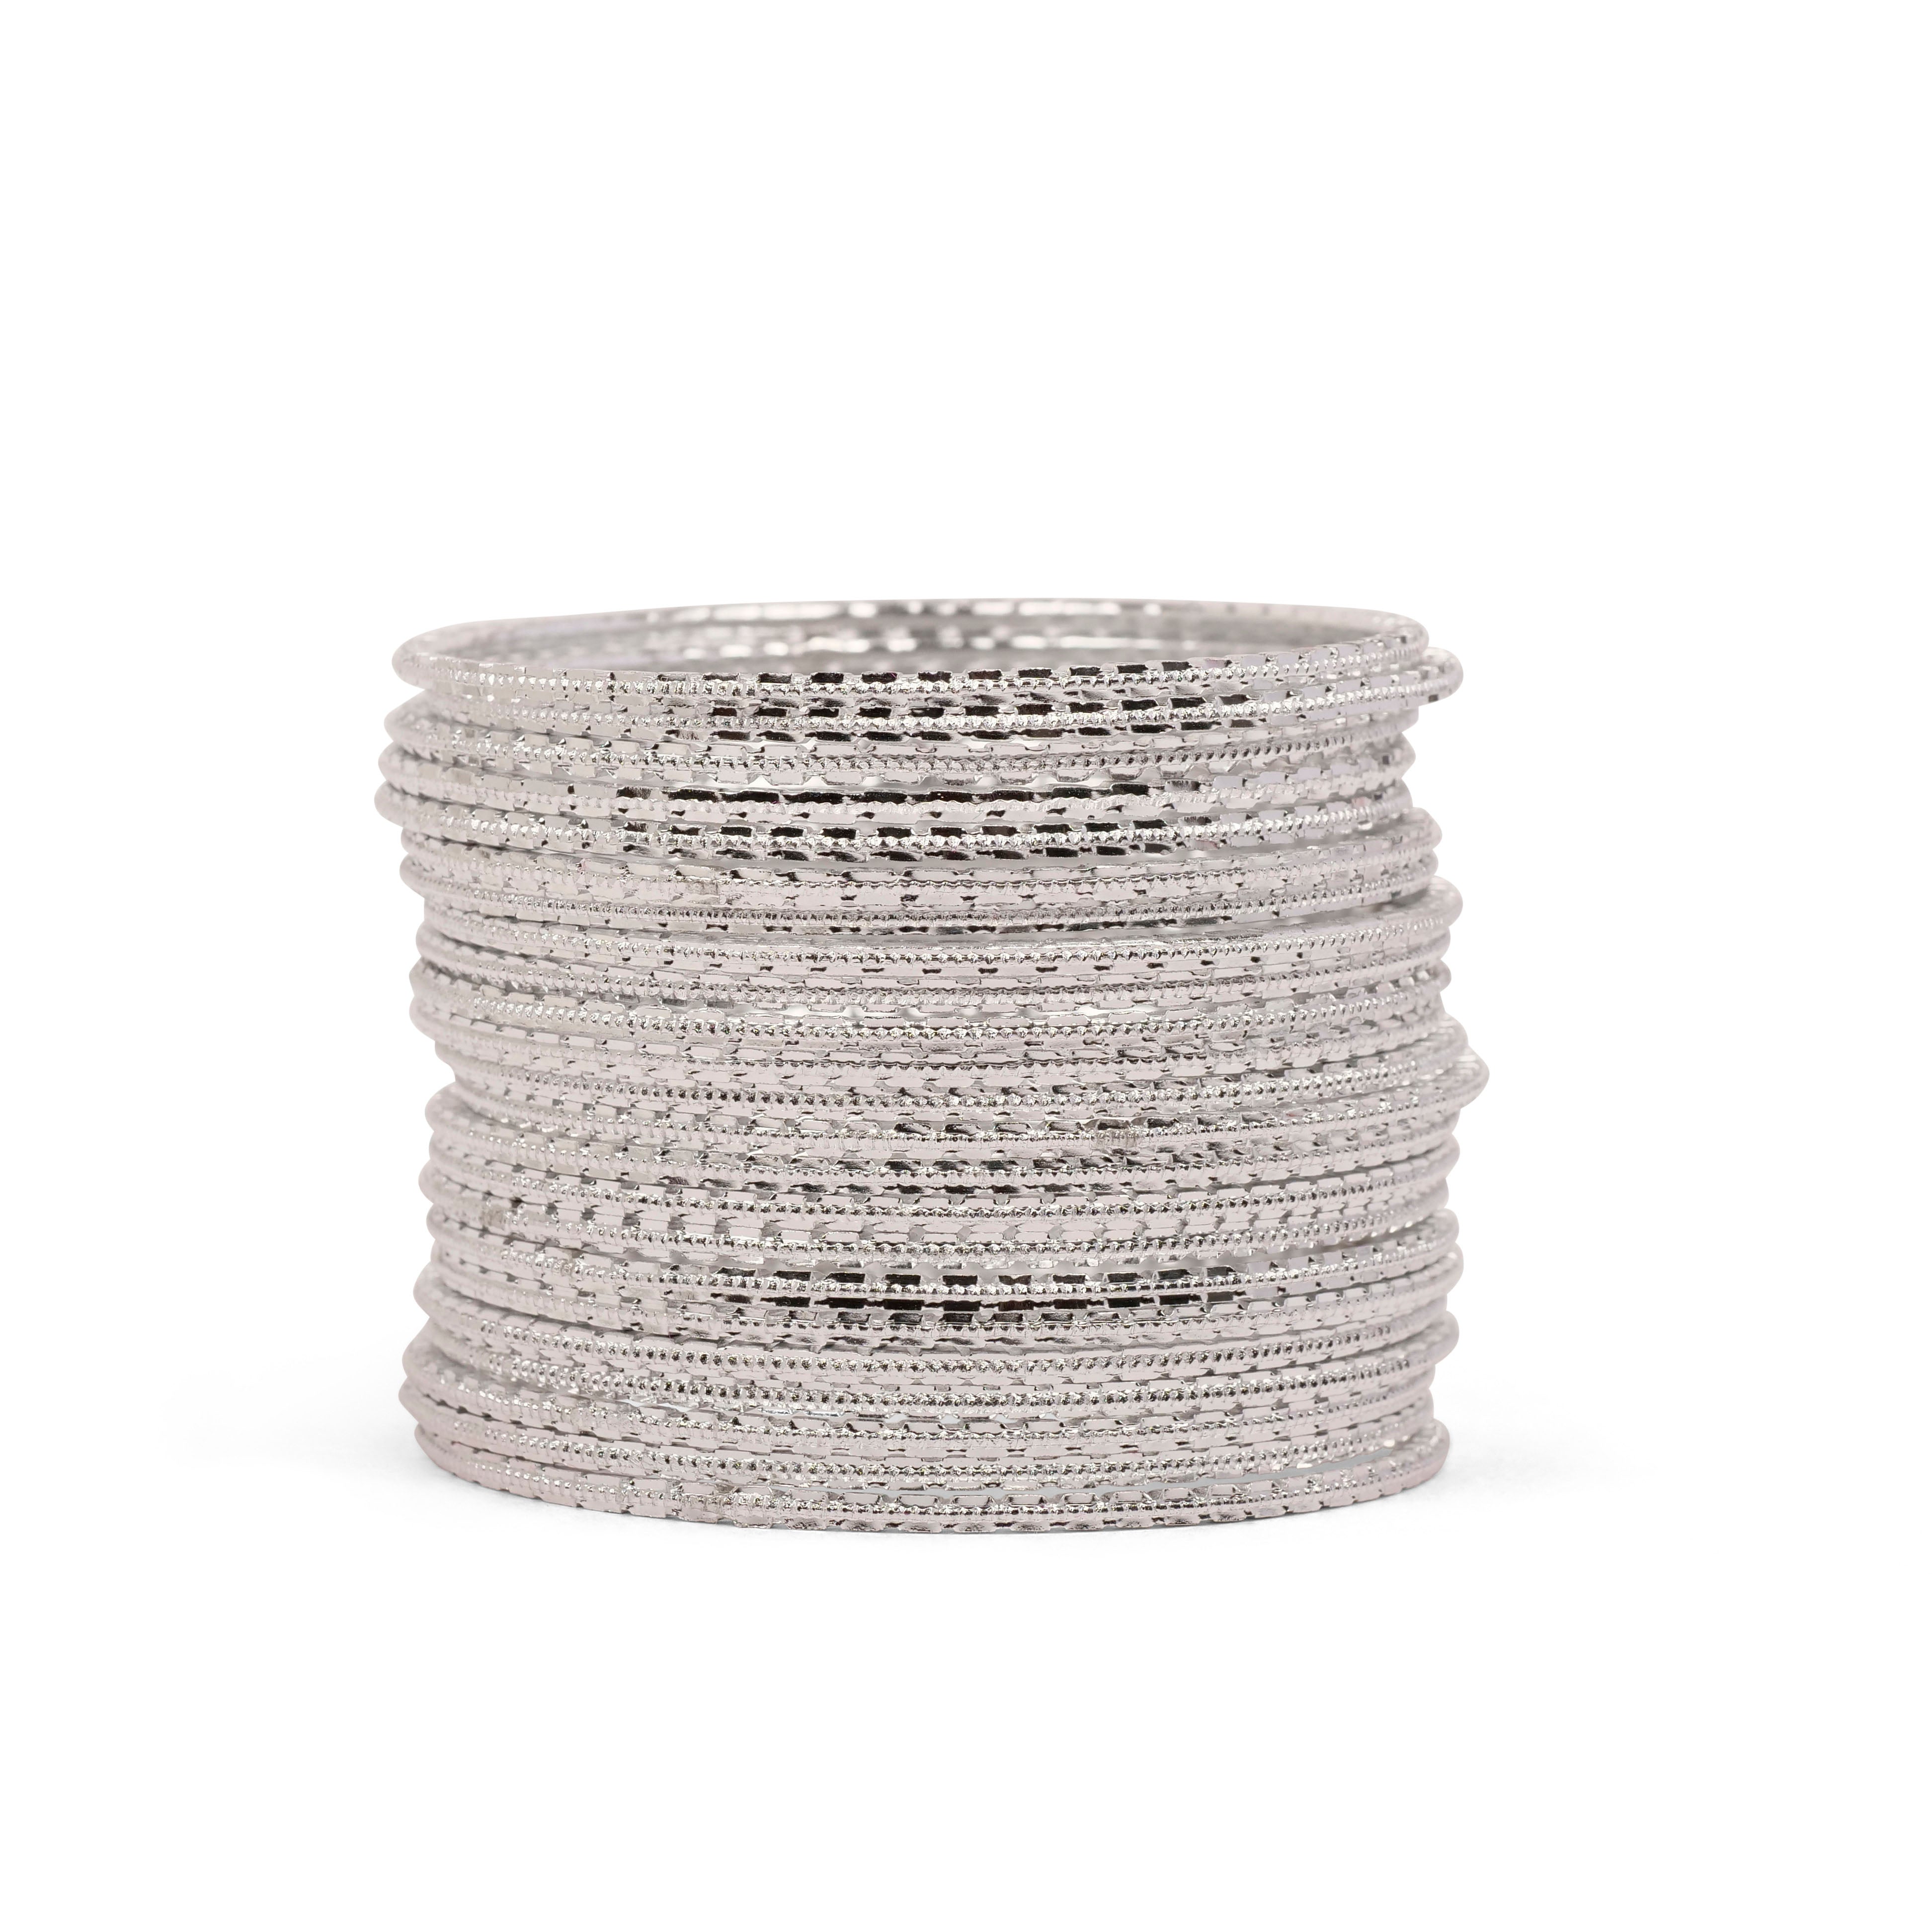 Silver Patterned Bangles